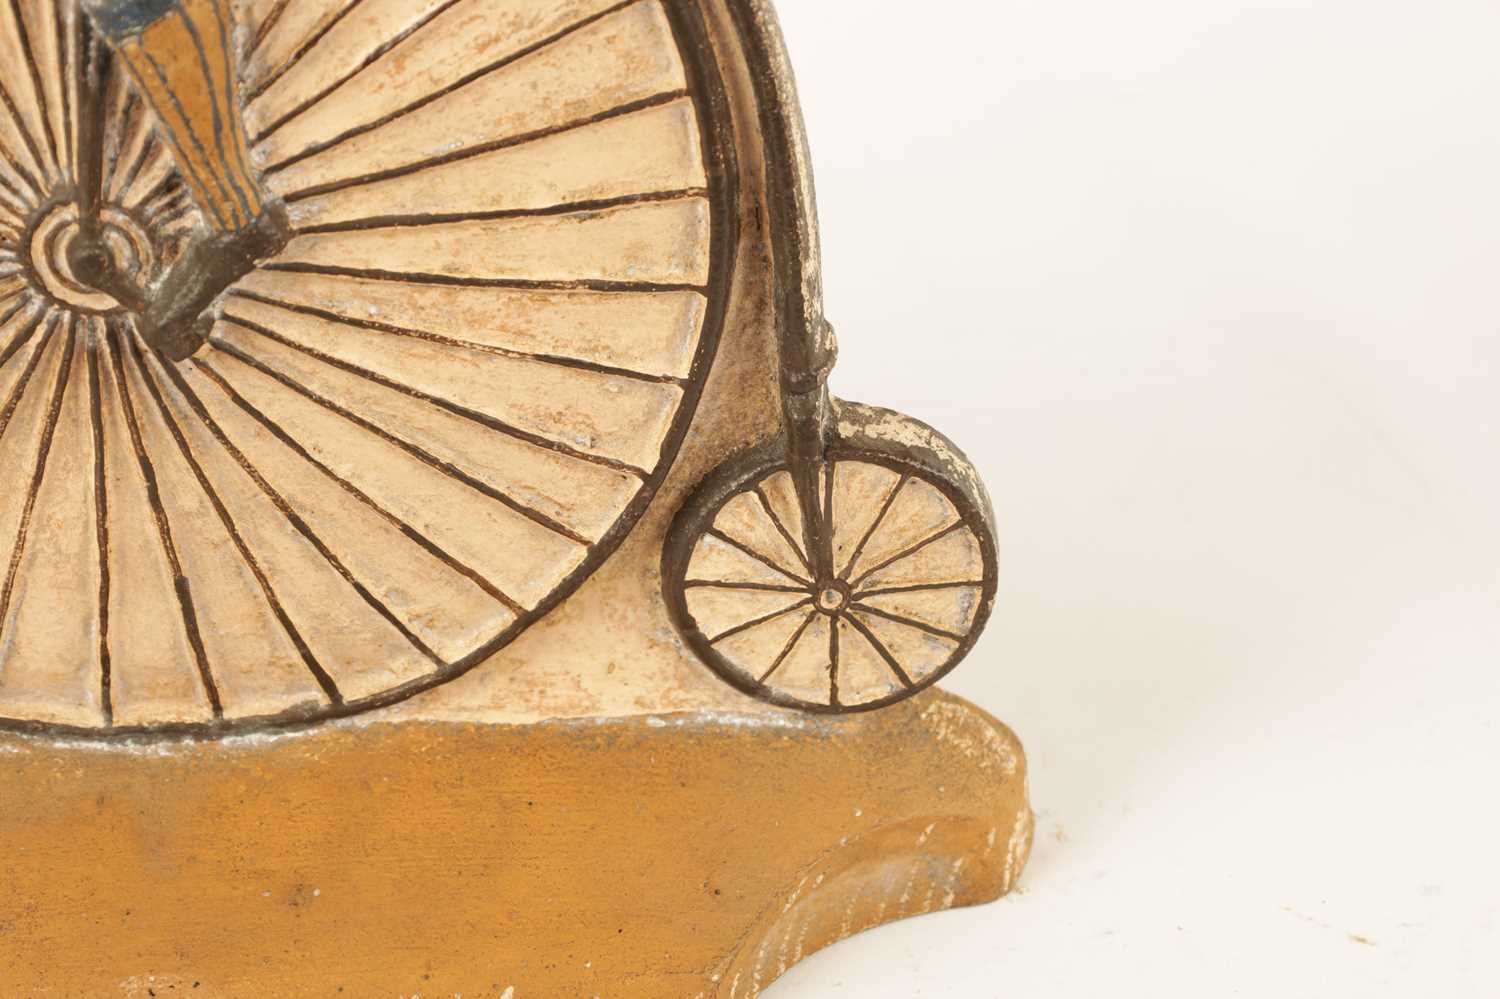 A RARE 19TH CENTURY CAST IRON PAINTED DOORSTOP FORMED AS A CYCLIST MOUNTED ON A PENNY FARTHING - Image 4 of 6